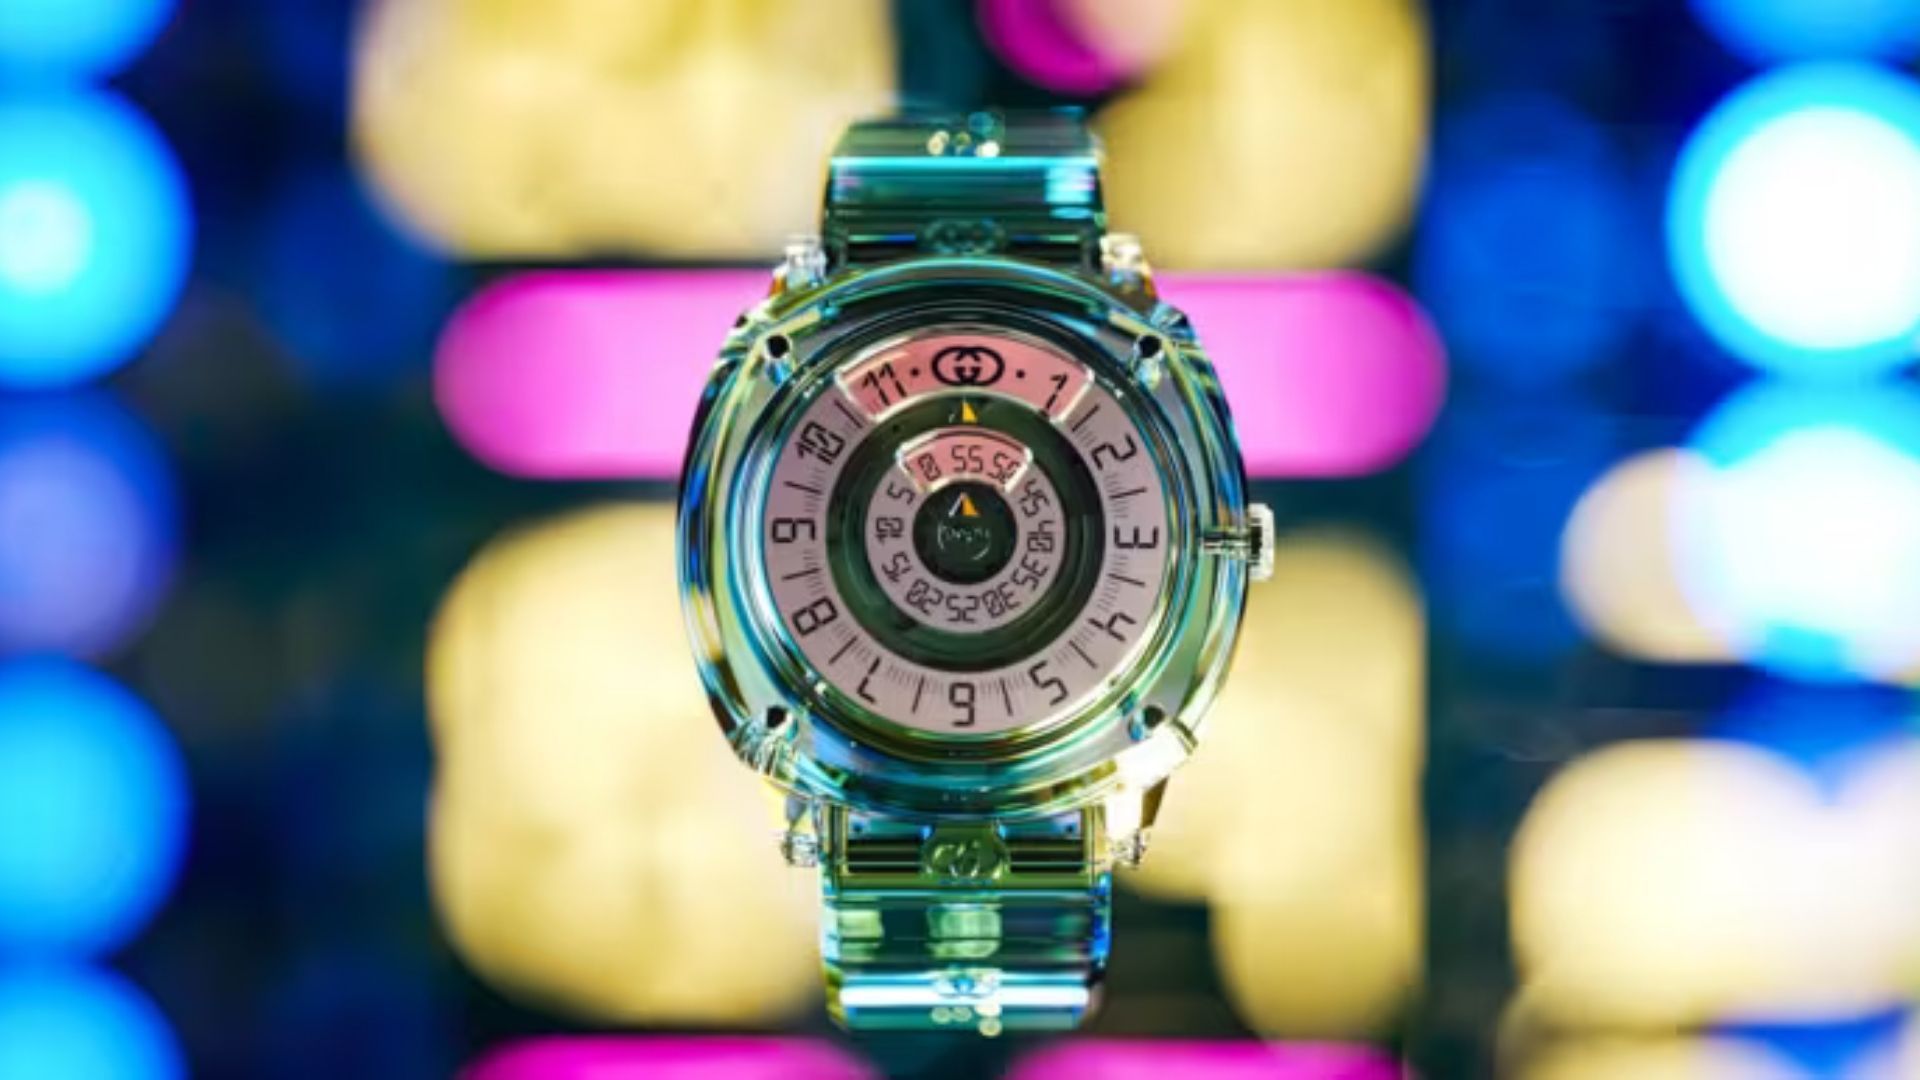 Grip Sapphire from Gucci 'High Watchmaking' collection